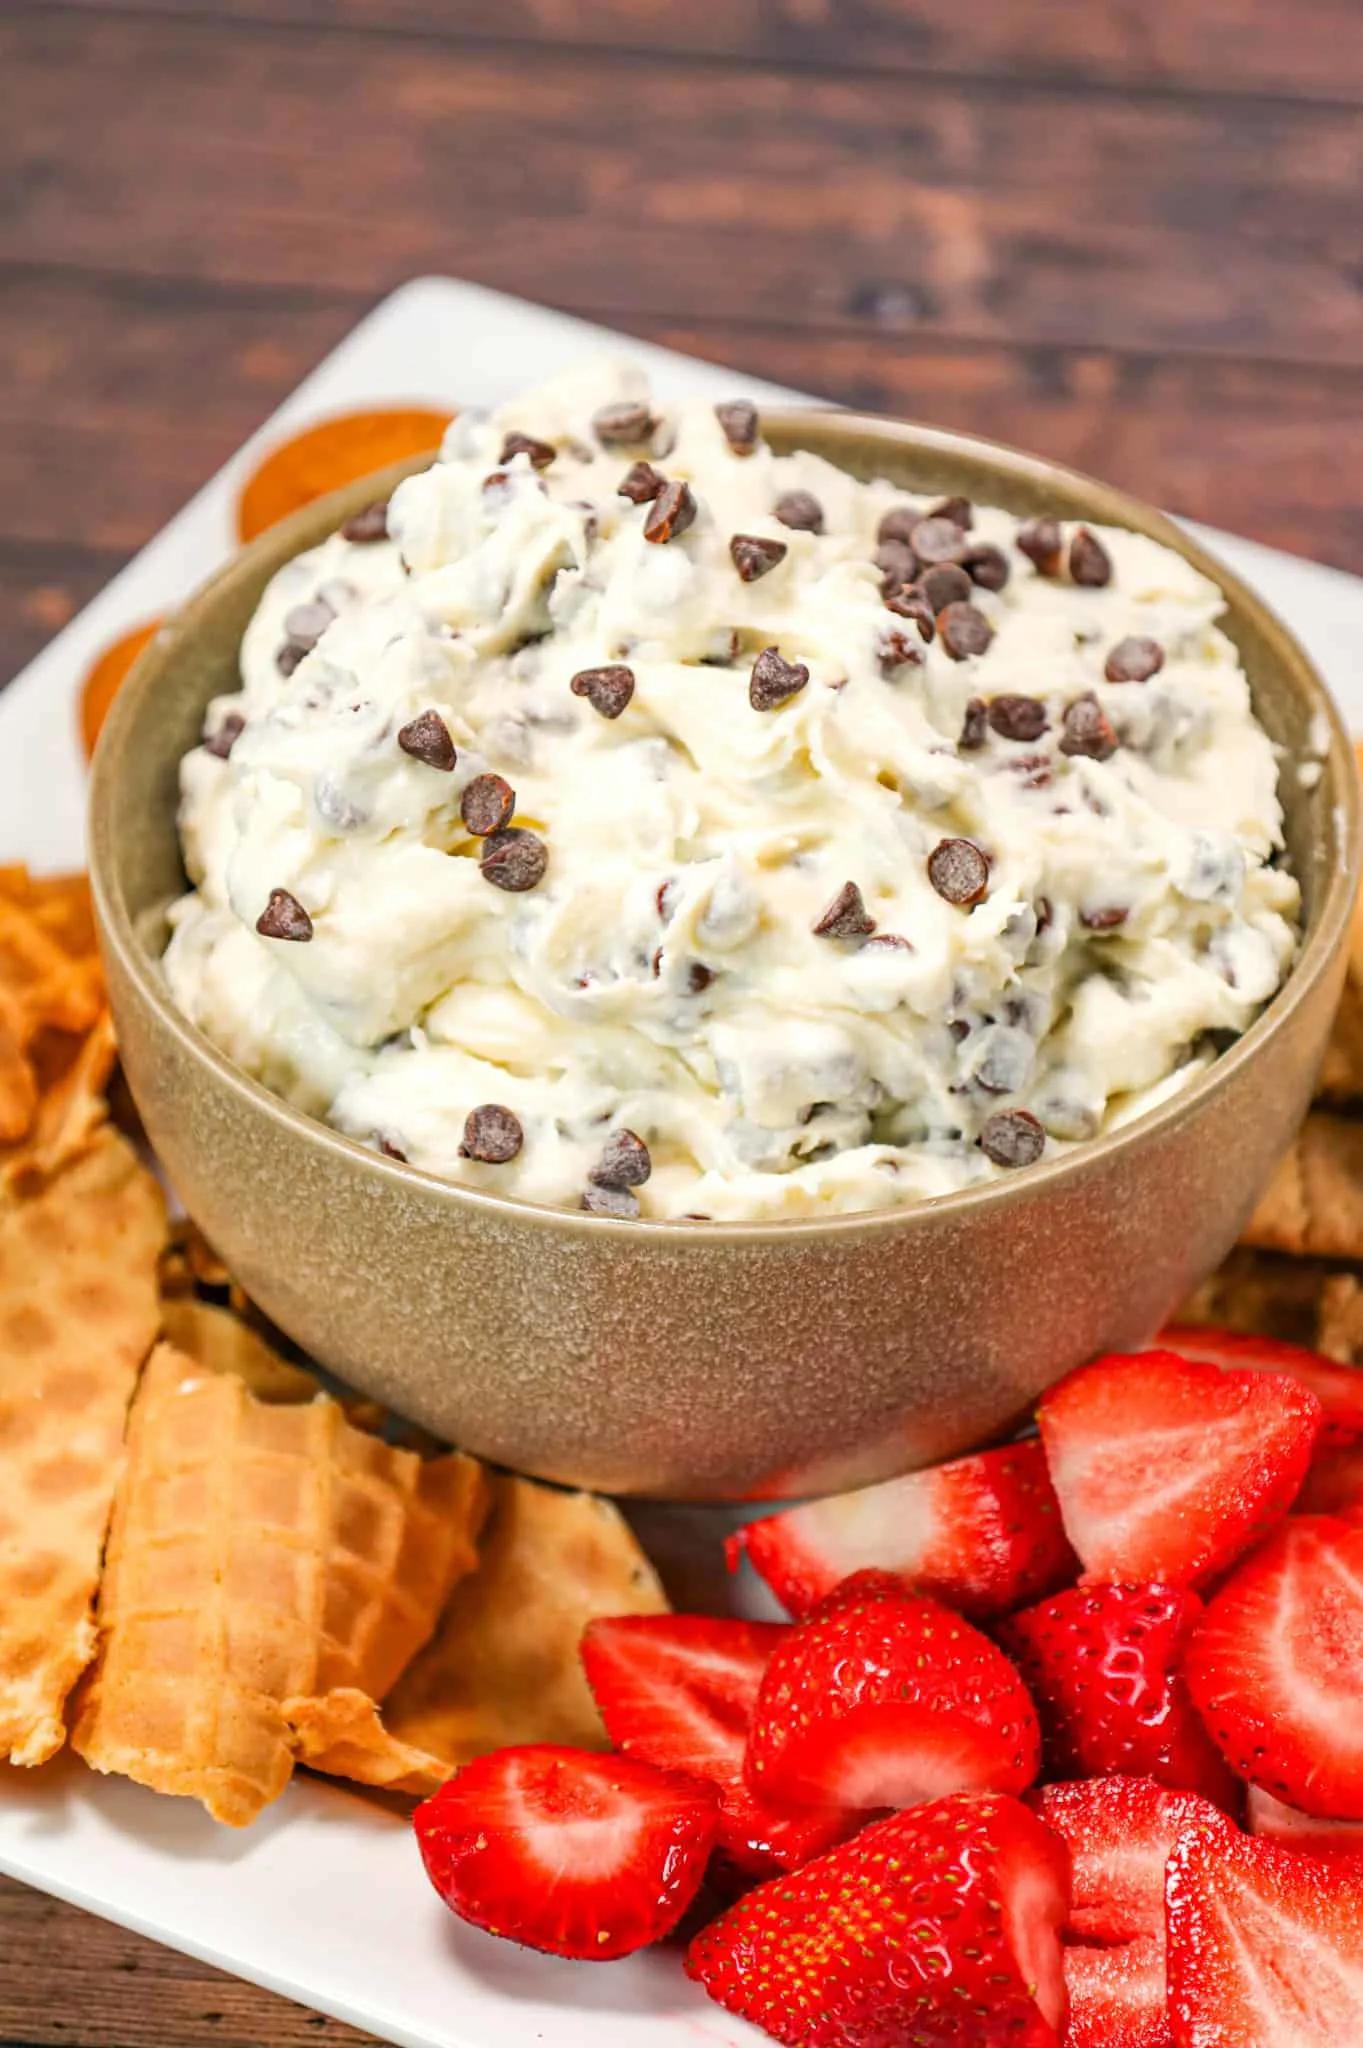 Cannoli Dip is an easy no bake dessert recipe made with ricotta cheese, cream cheese, confectioner's sugar and loaded with mini semi sweet chocolate chips.